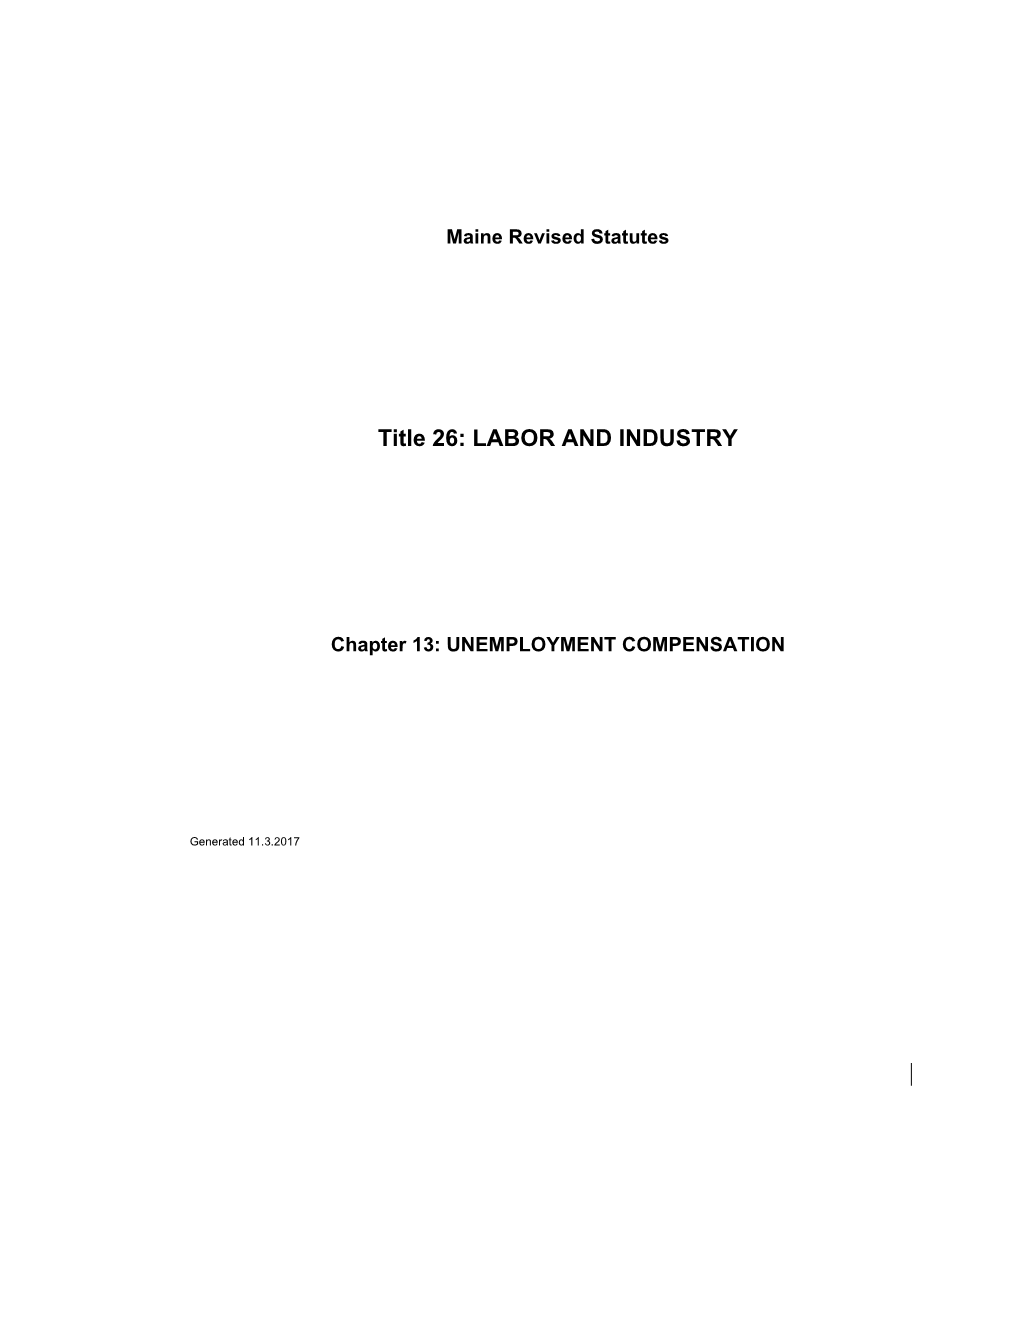 Title 26: LABOR and INDUSTRY s1